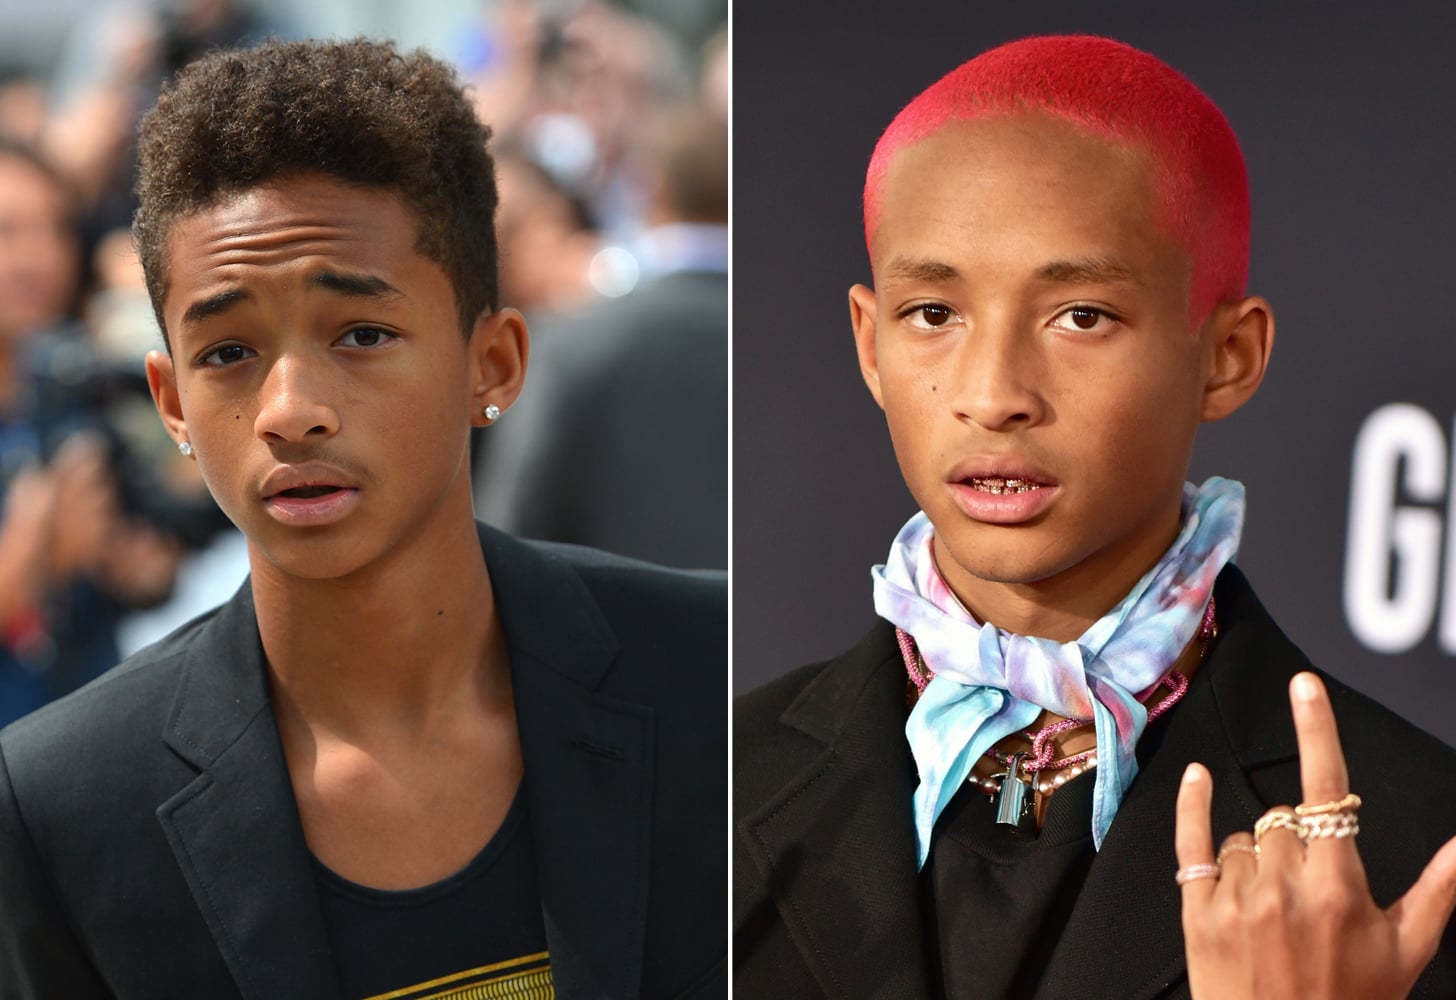 Jaden Smith Cut His Hair, Then Wore It to The Met Gala 2017